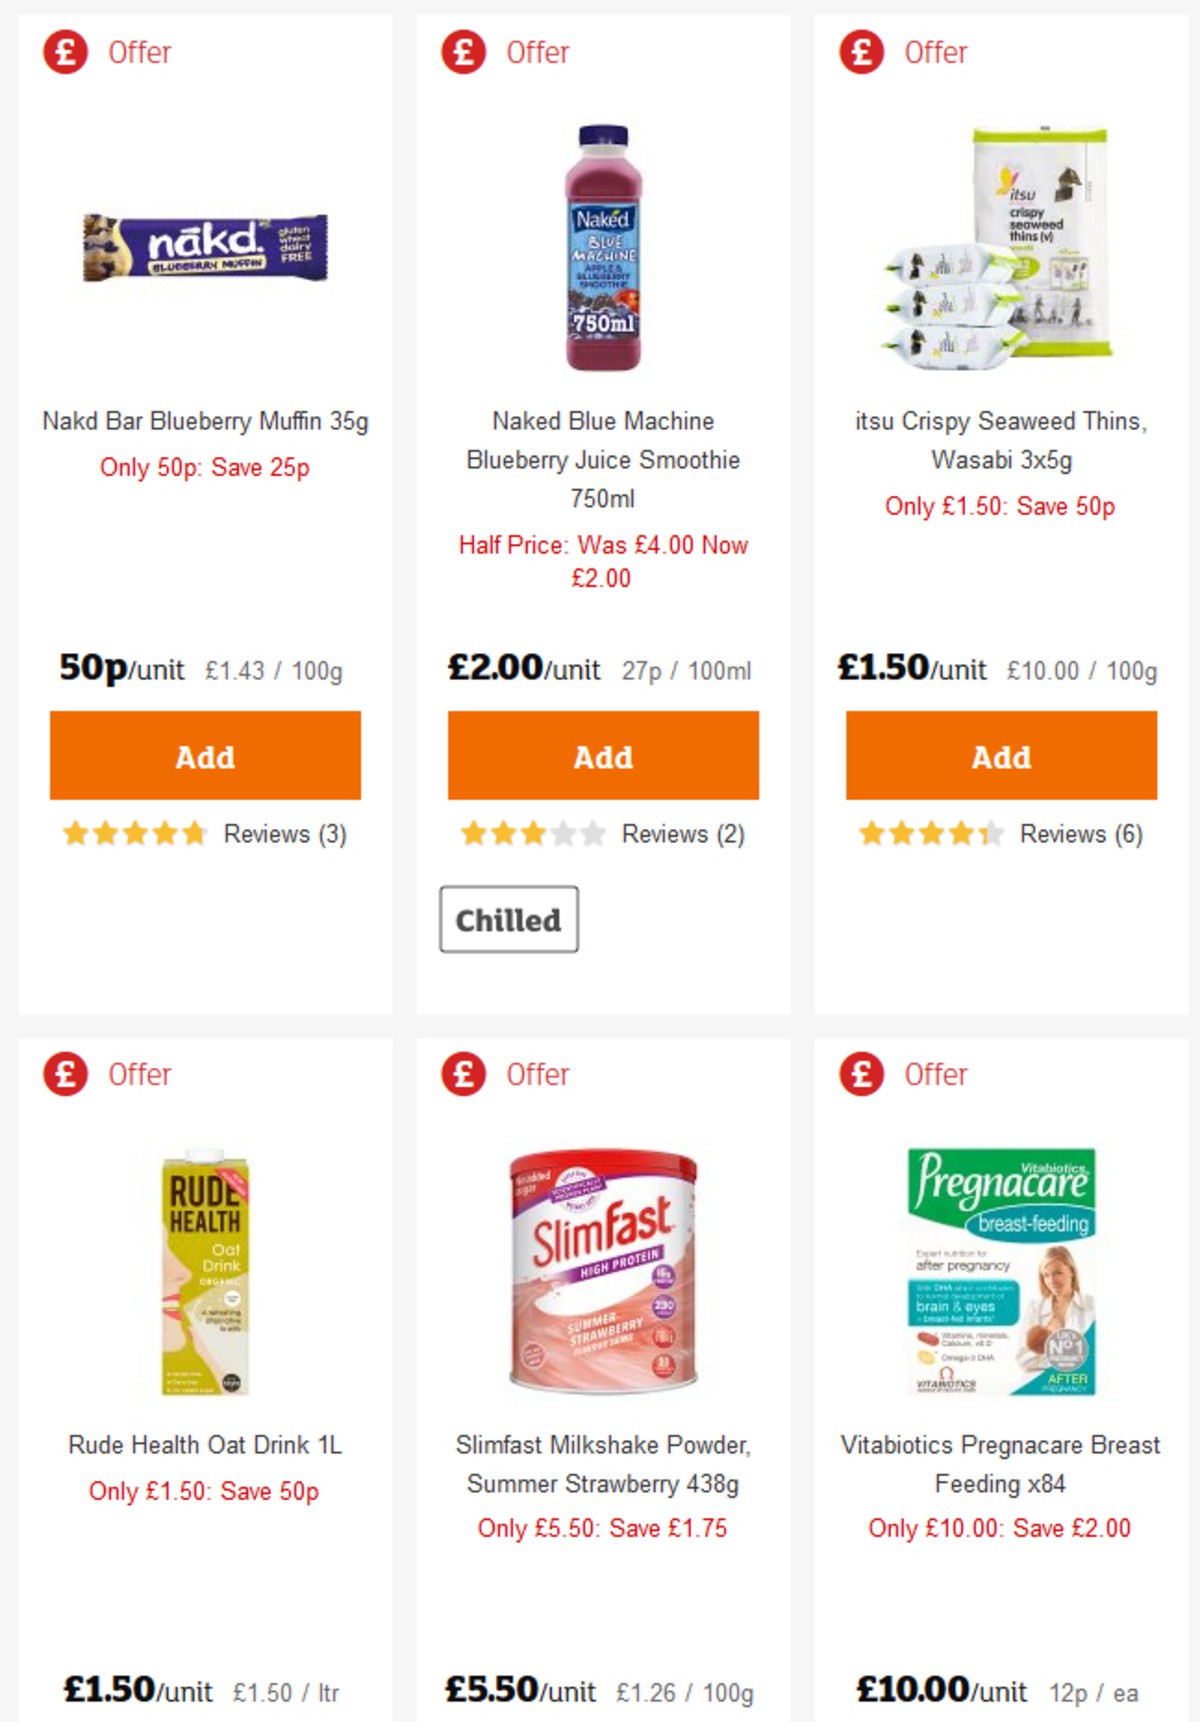 Sainsbury's Offers from 3 May